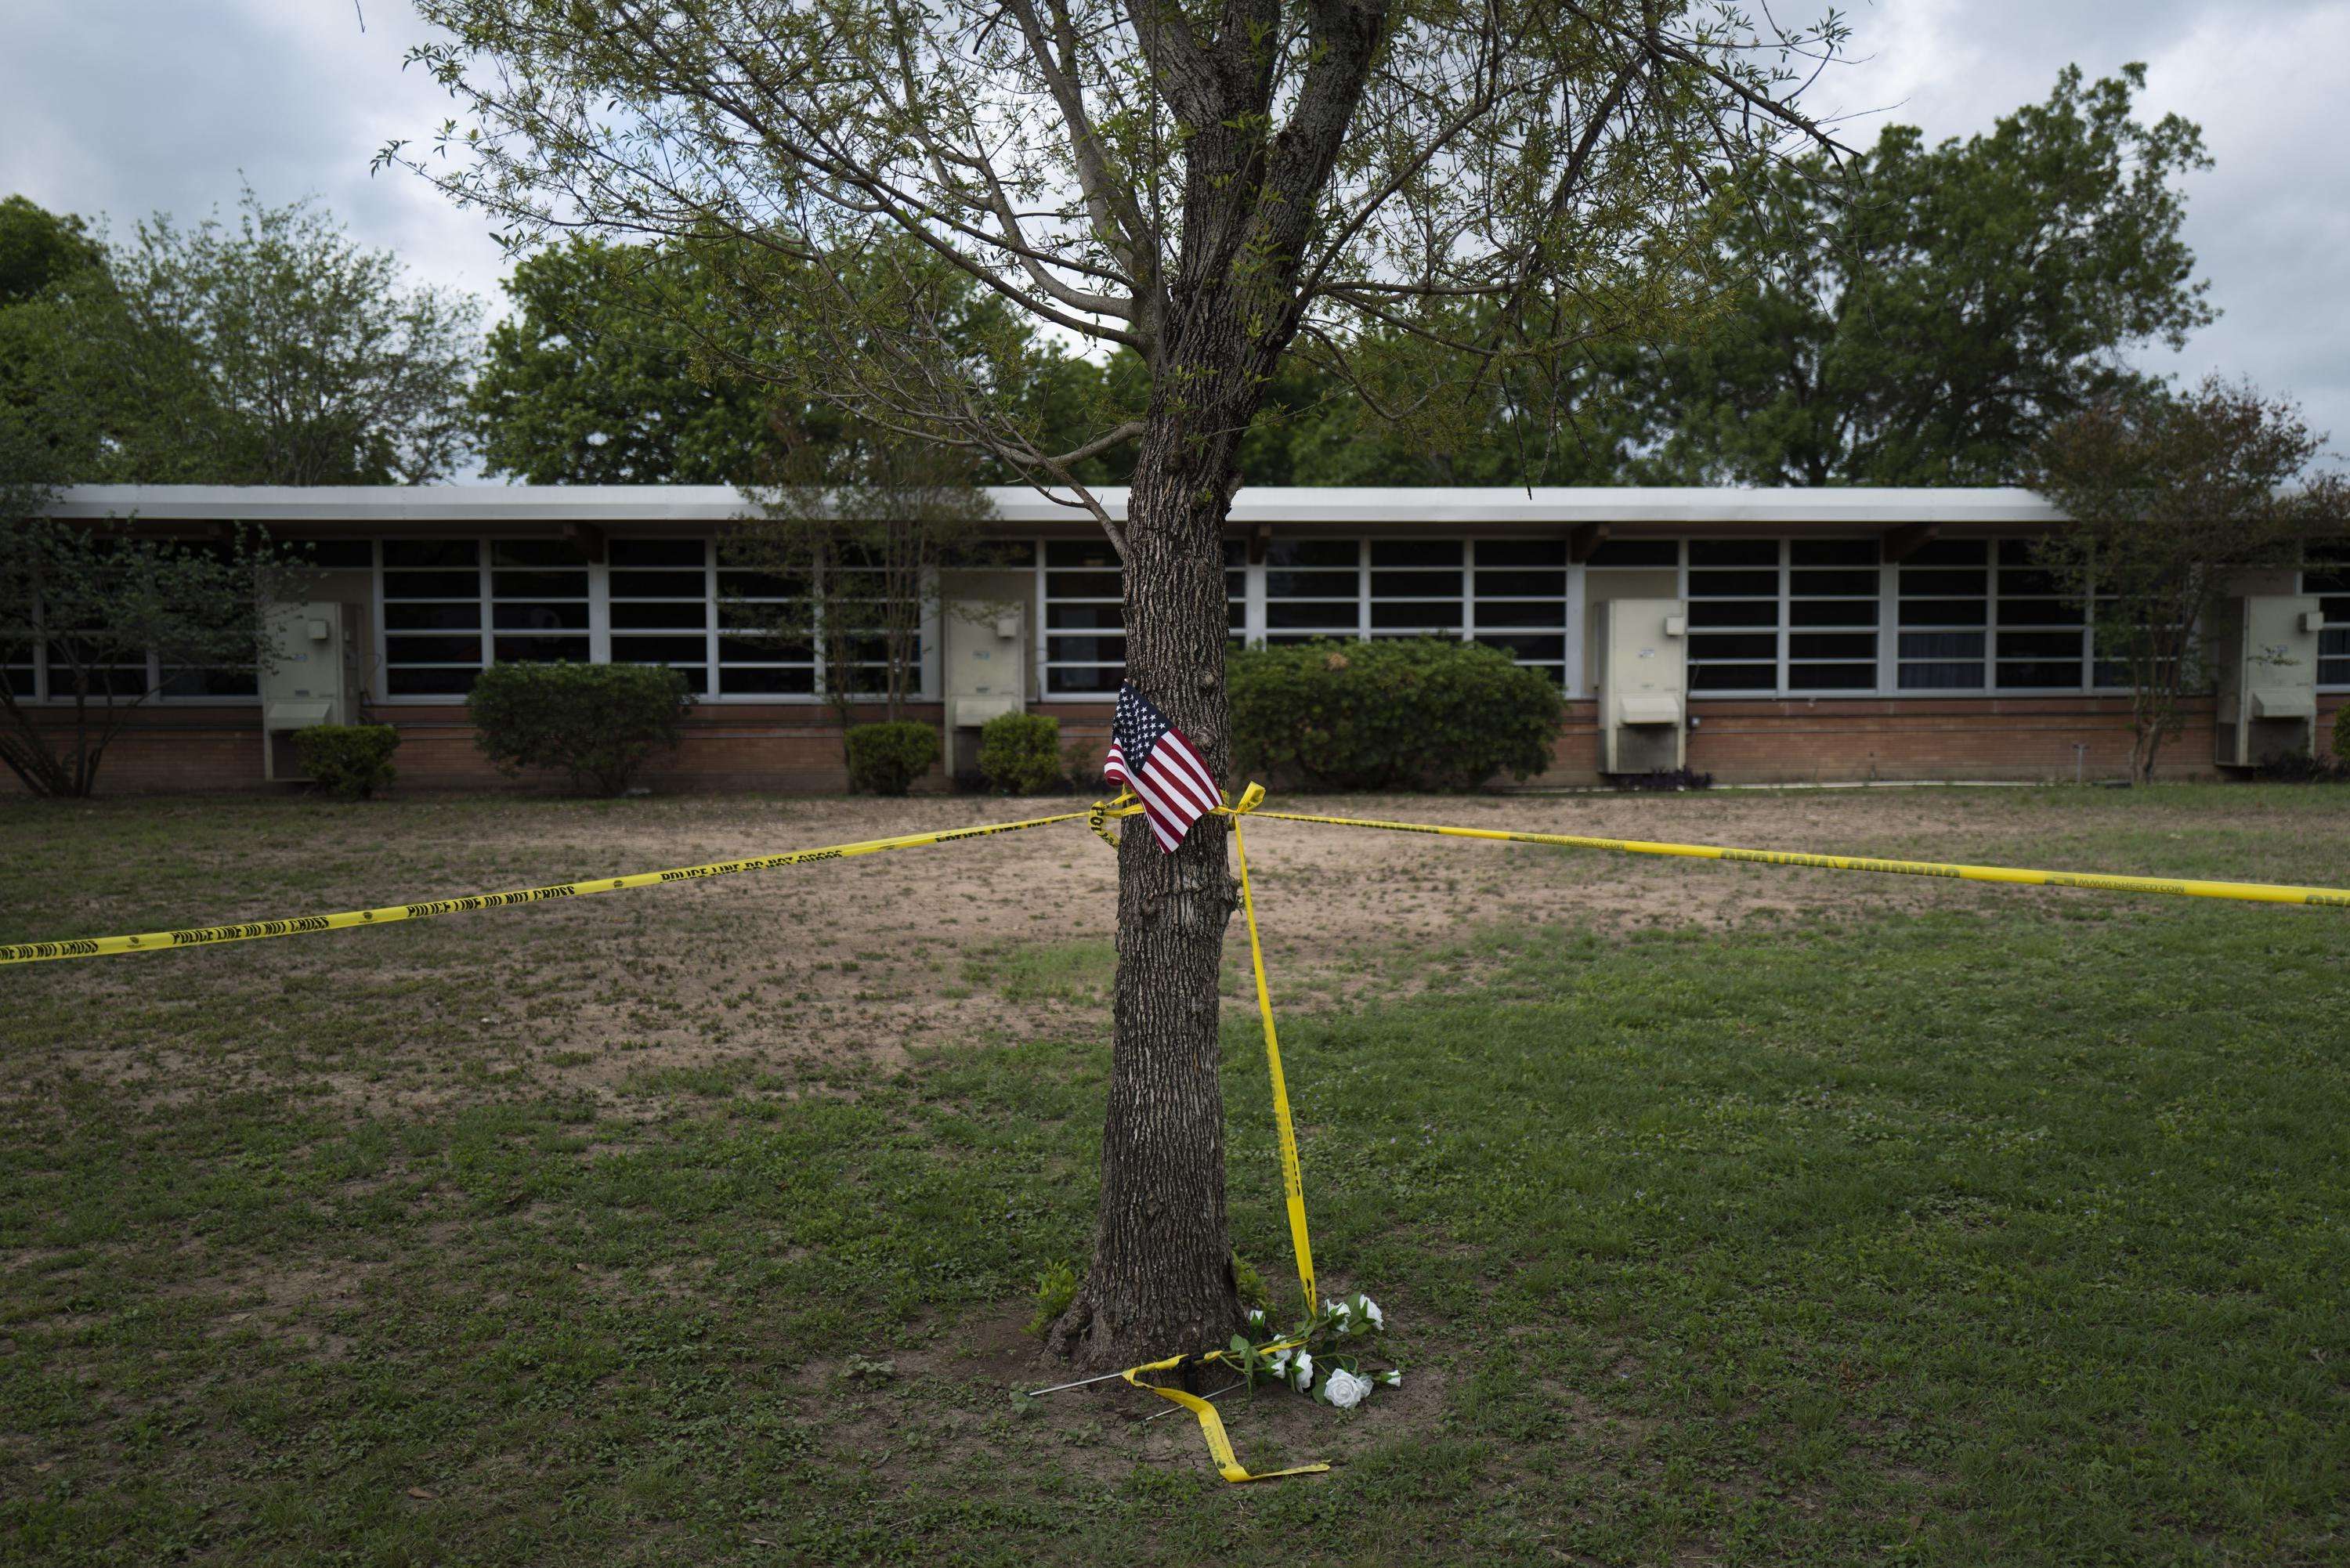 image for ‘Very angry’: Uvalde locals grapple with school chief’s role